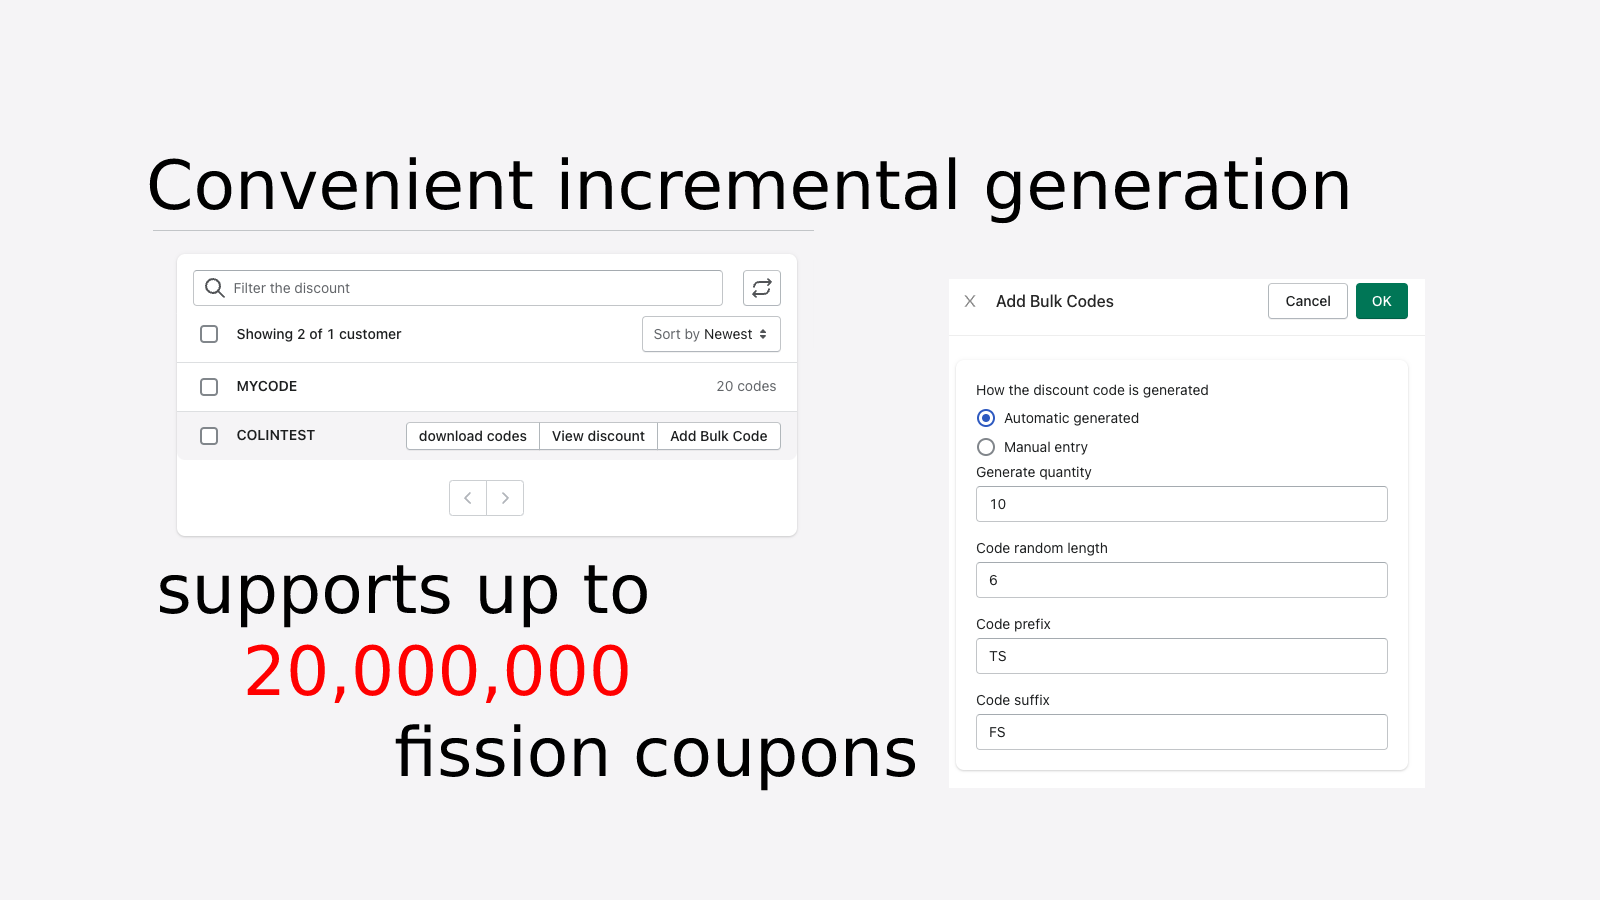 incremental generation supports up to 20,000,000 fission coupons